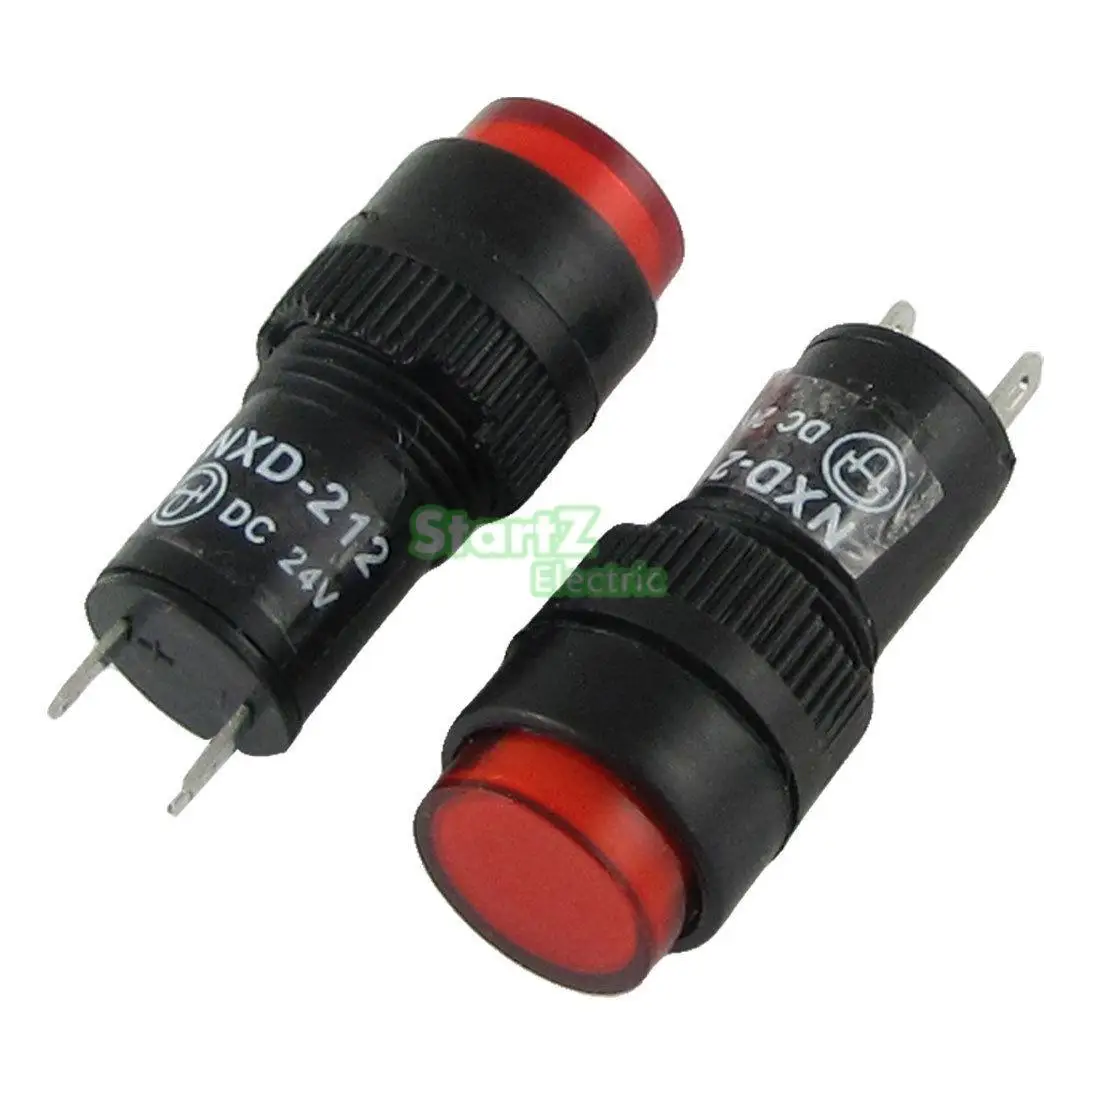 12mm AC 220V Metal Red Indicator Light Signal Lamp Thread Mounted 